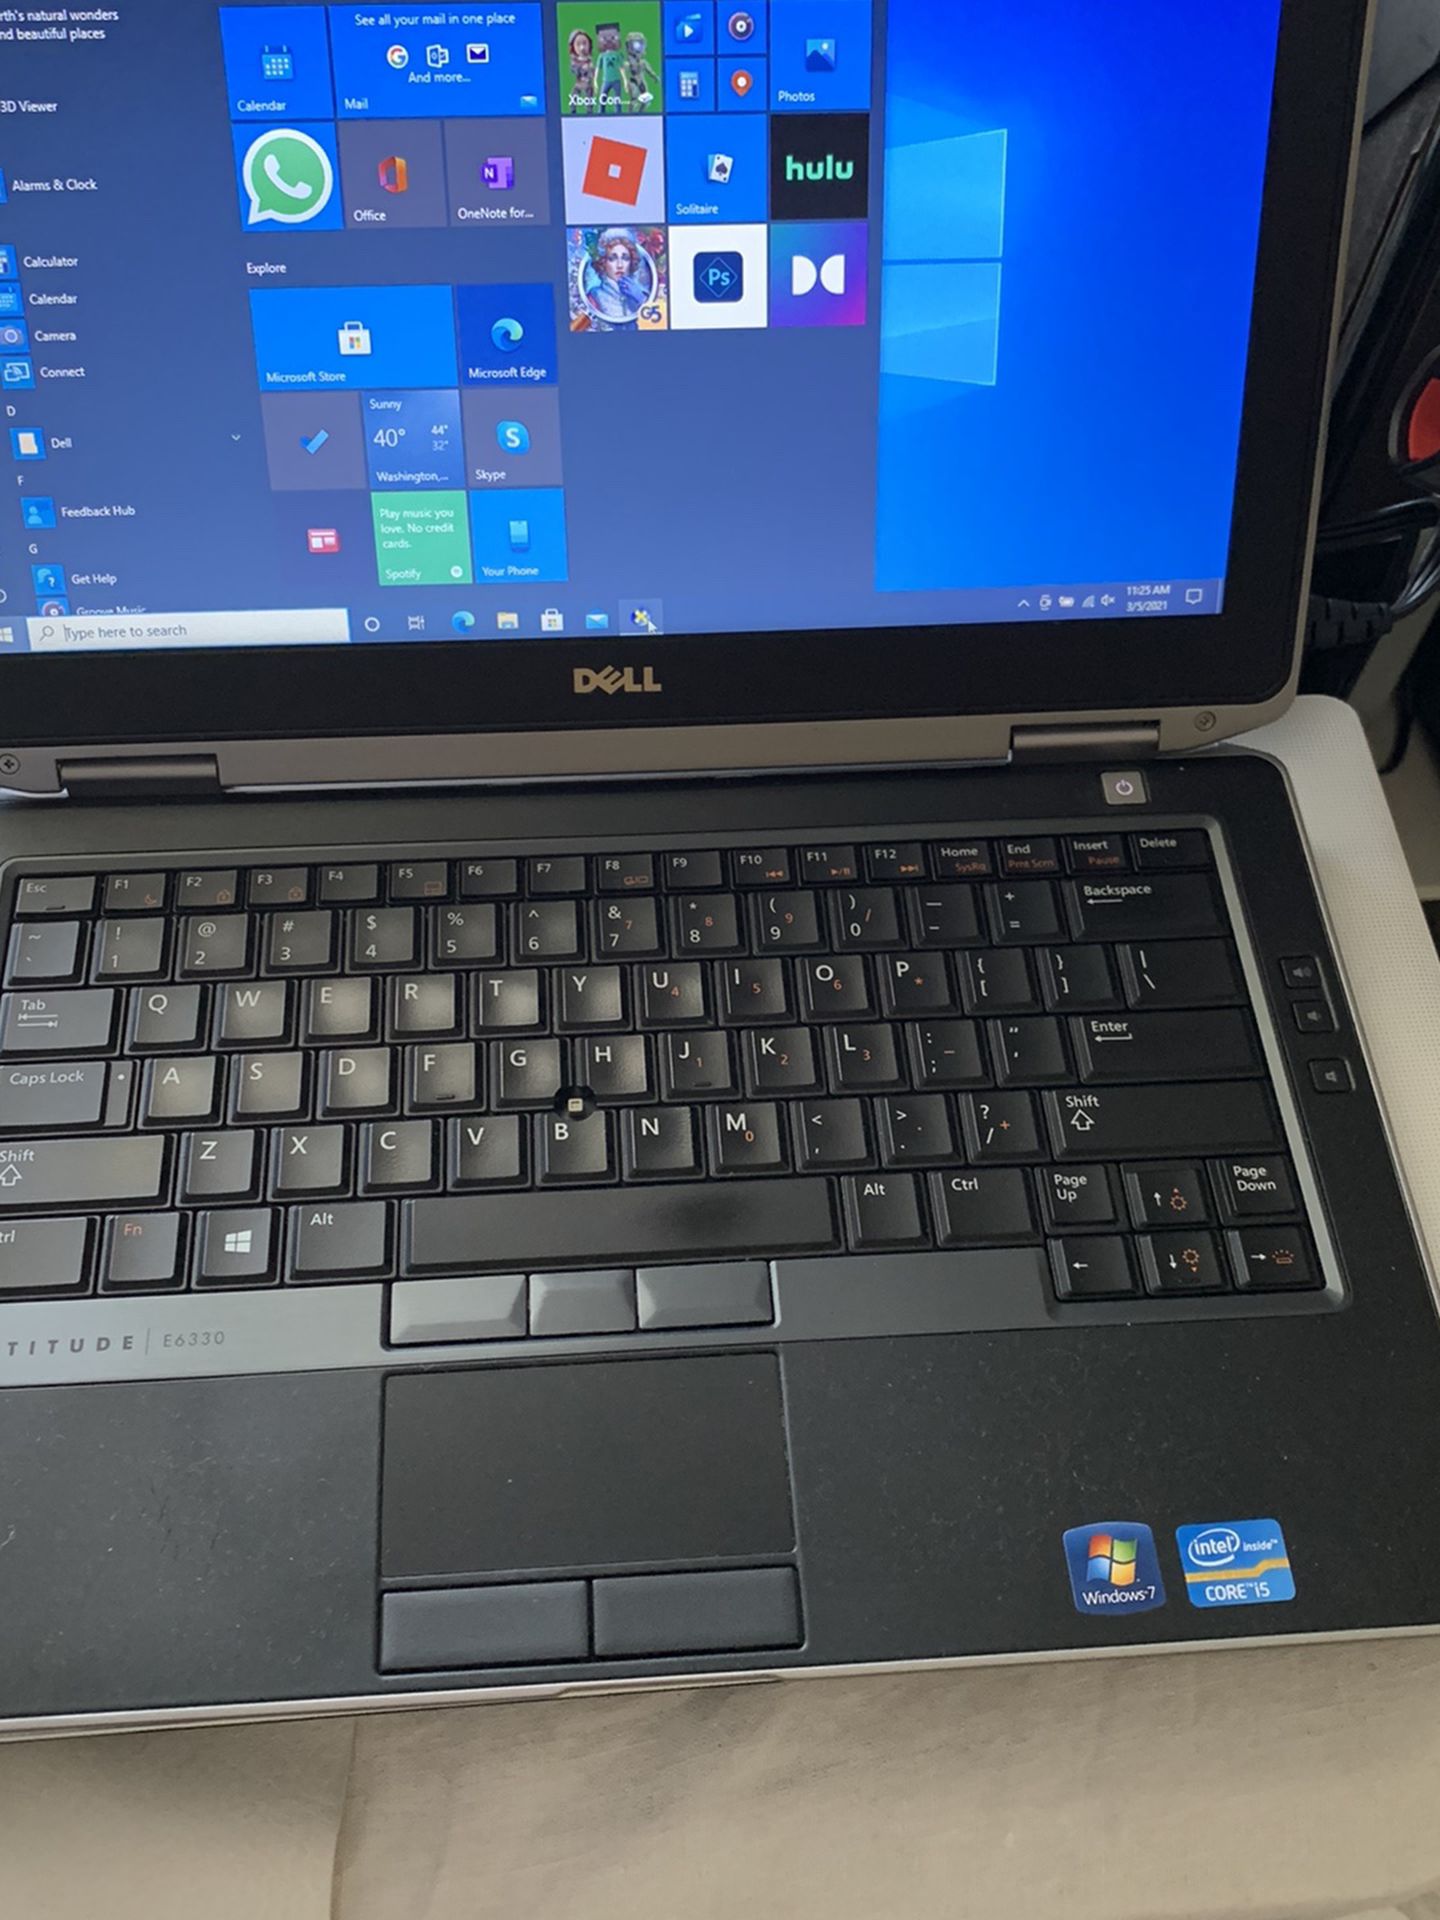 FAST !!! CHEAP WORK OFFICE SCHOOL Windows 10 LAPTOP // 14" Dell Lattitude - 8GB RAM - 500GB HDD - Charger included - Intel i5-3380M CPU 2.90Ghz - Inte